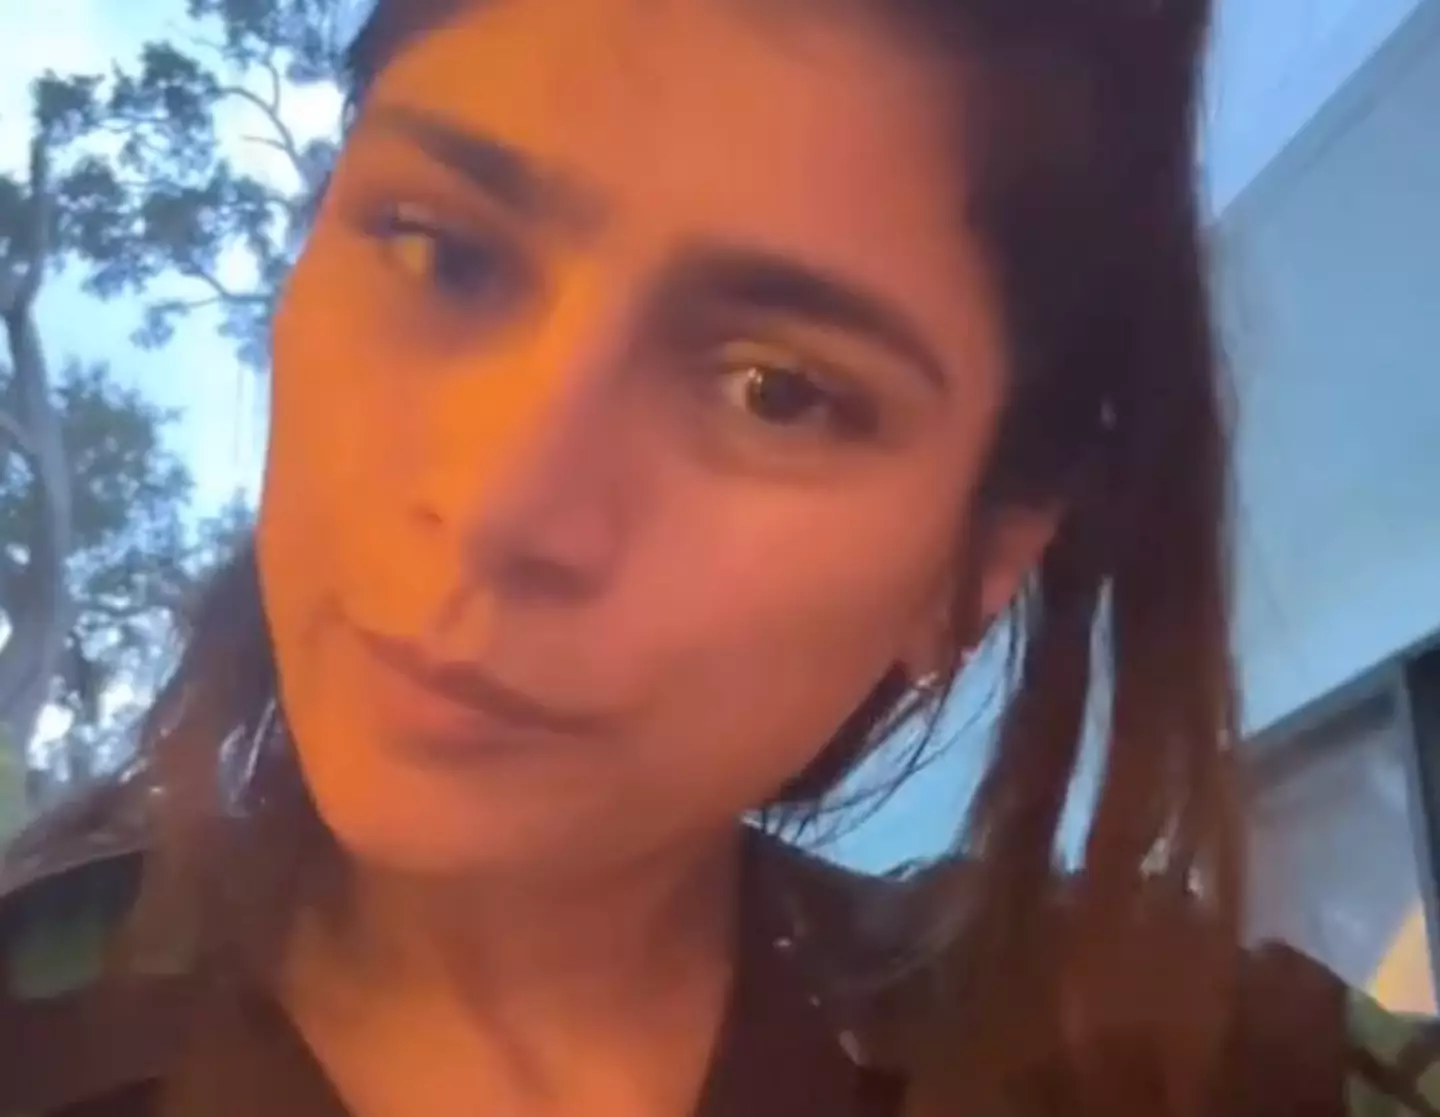 Mia Khalifa insisted people 'have to go' if the marriage isn't working.